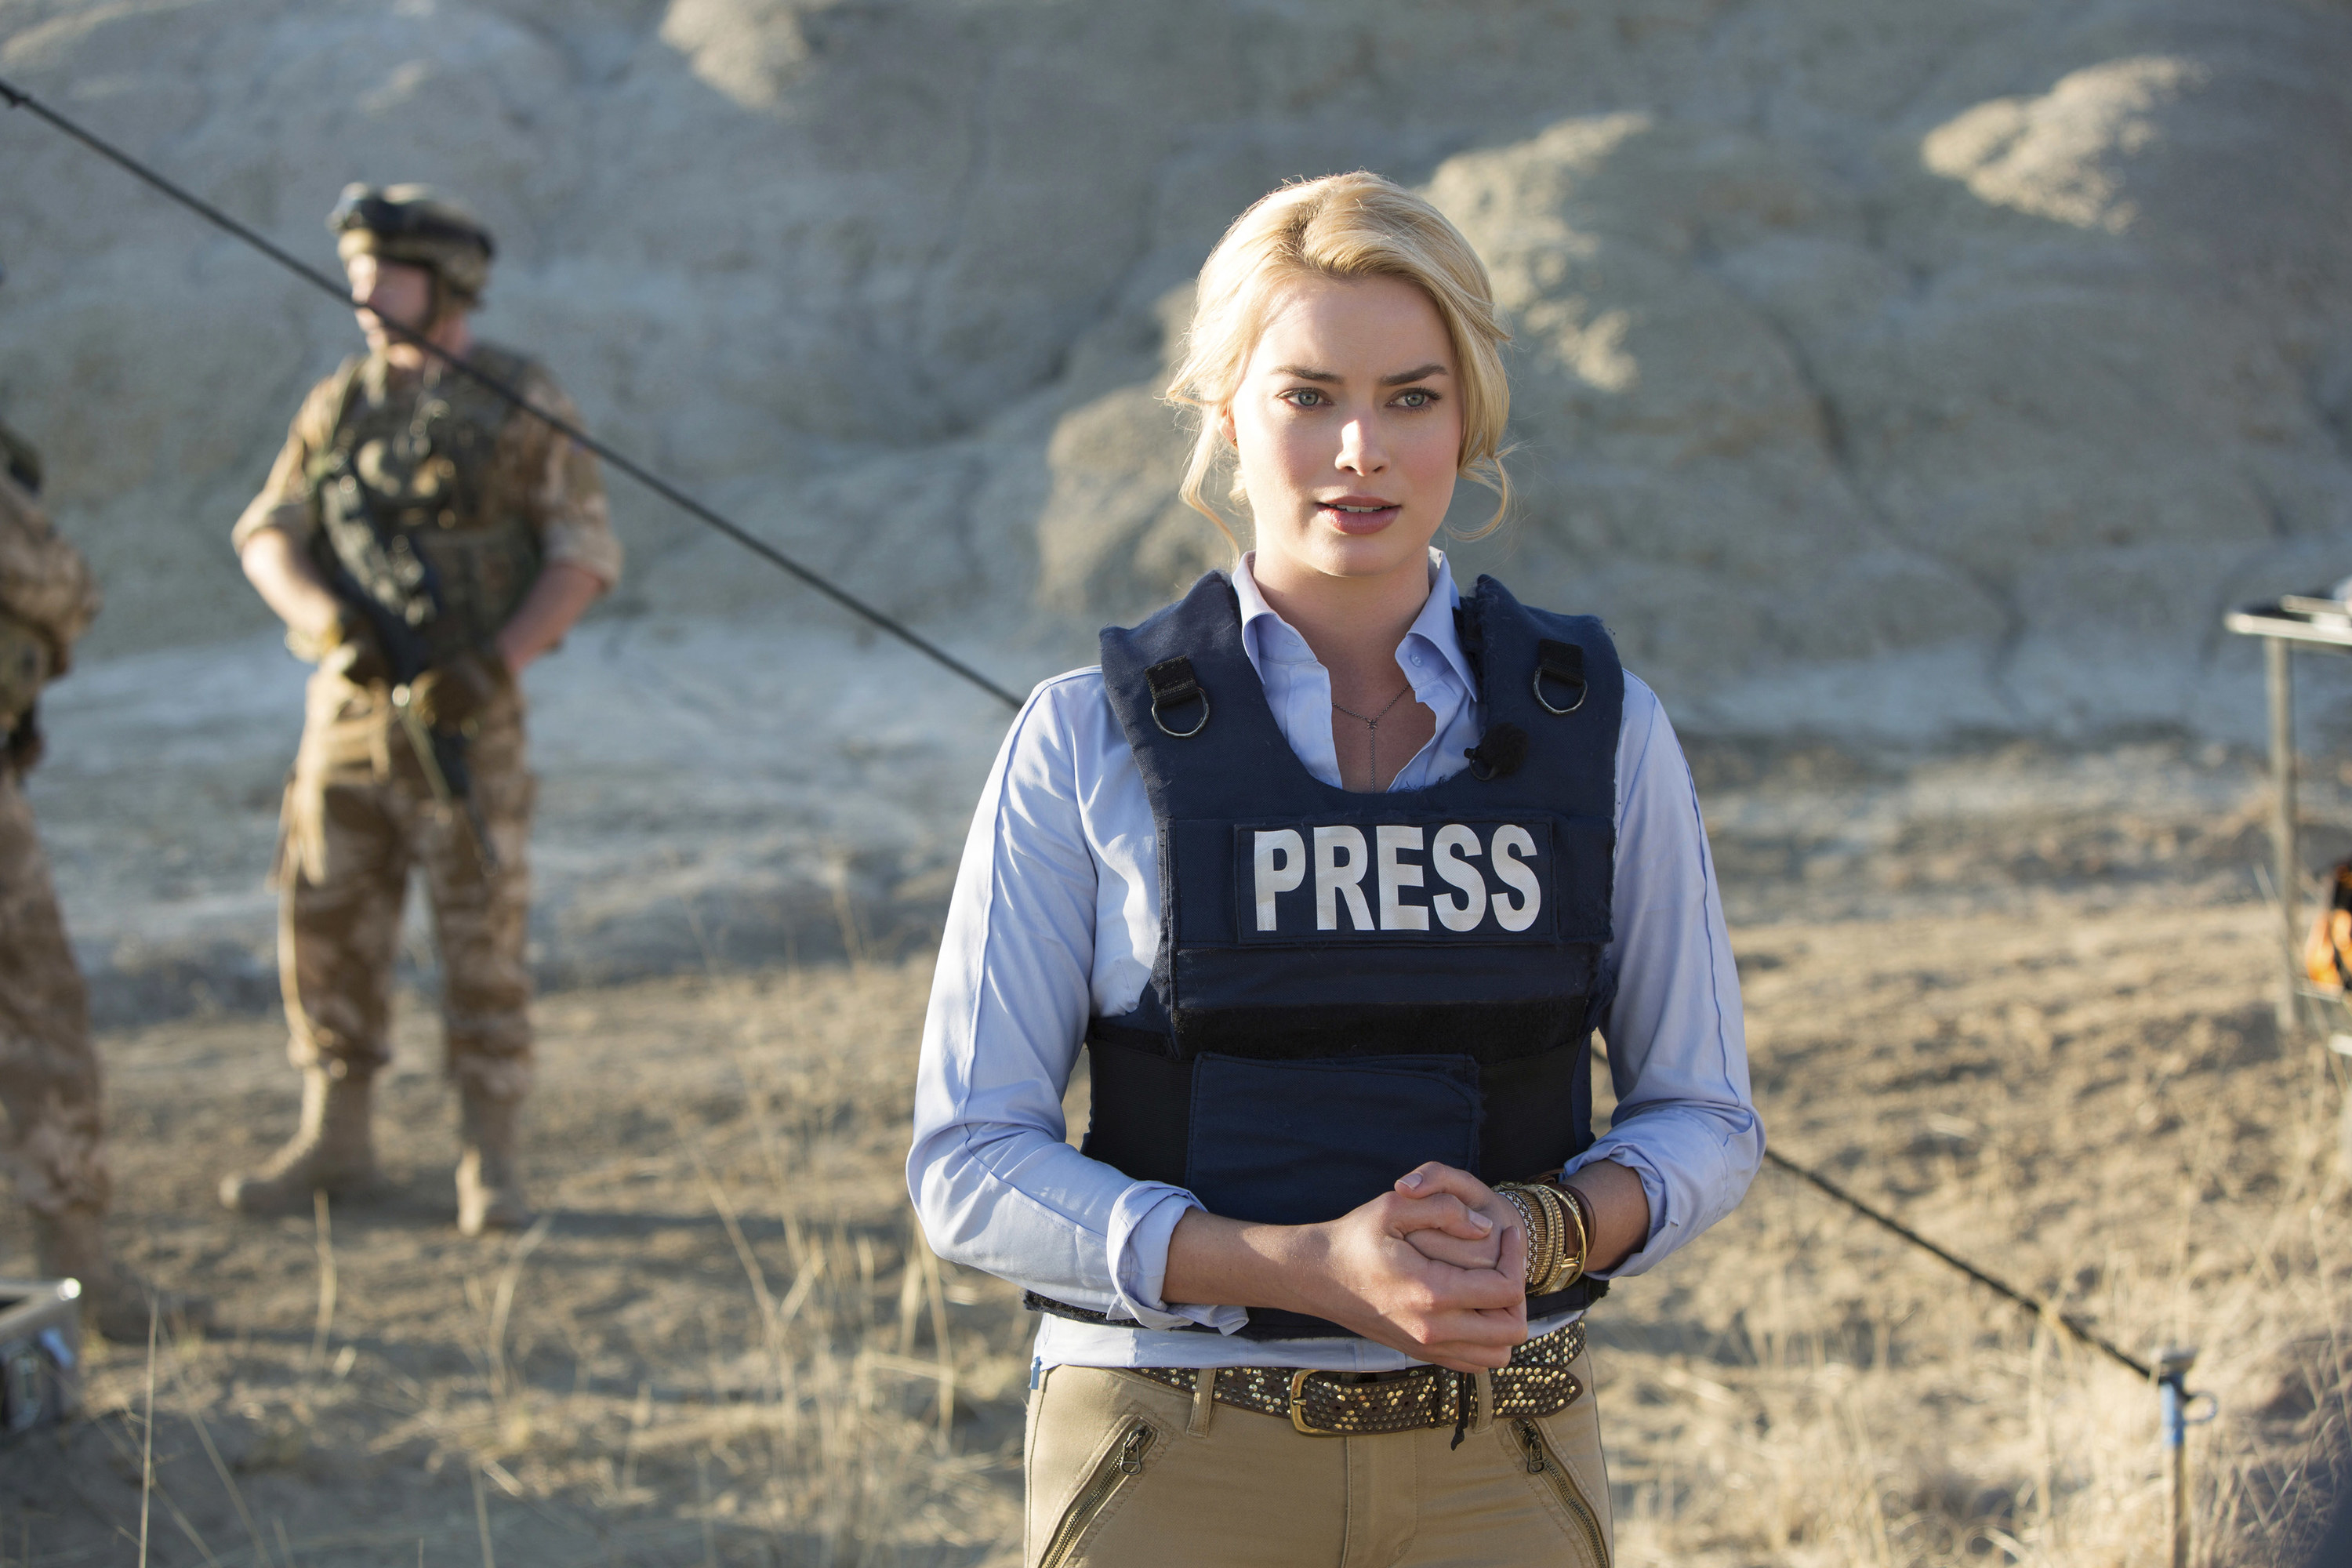 Margot Robbie stands with a press vest on